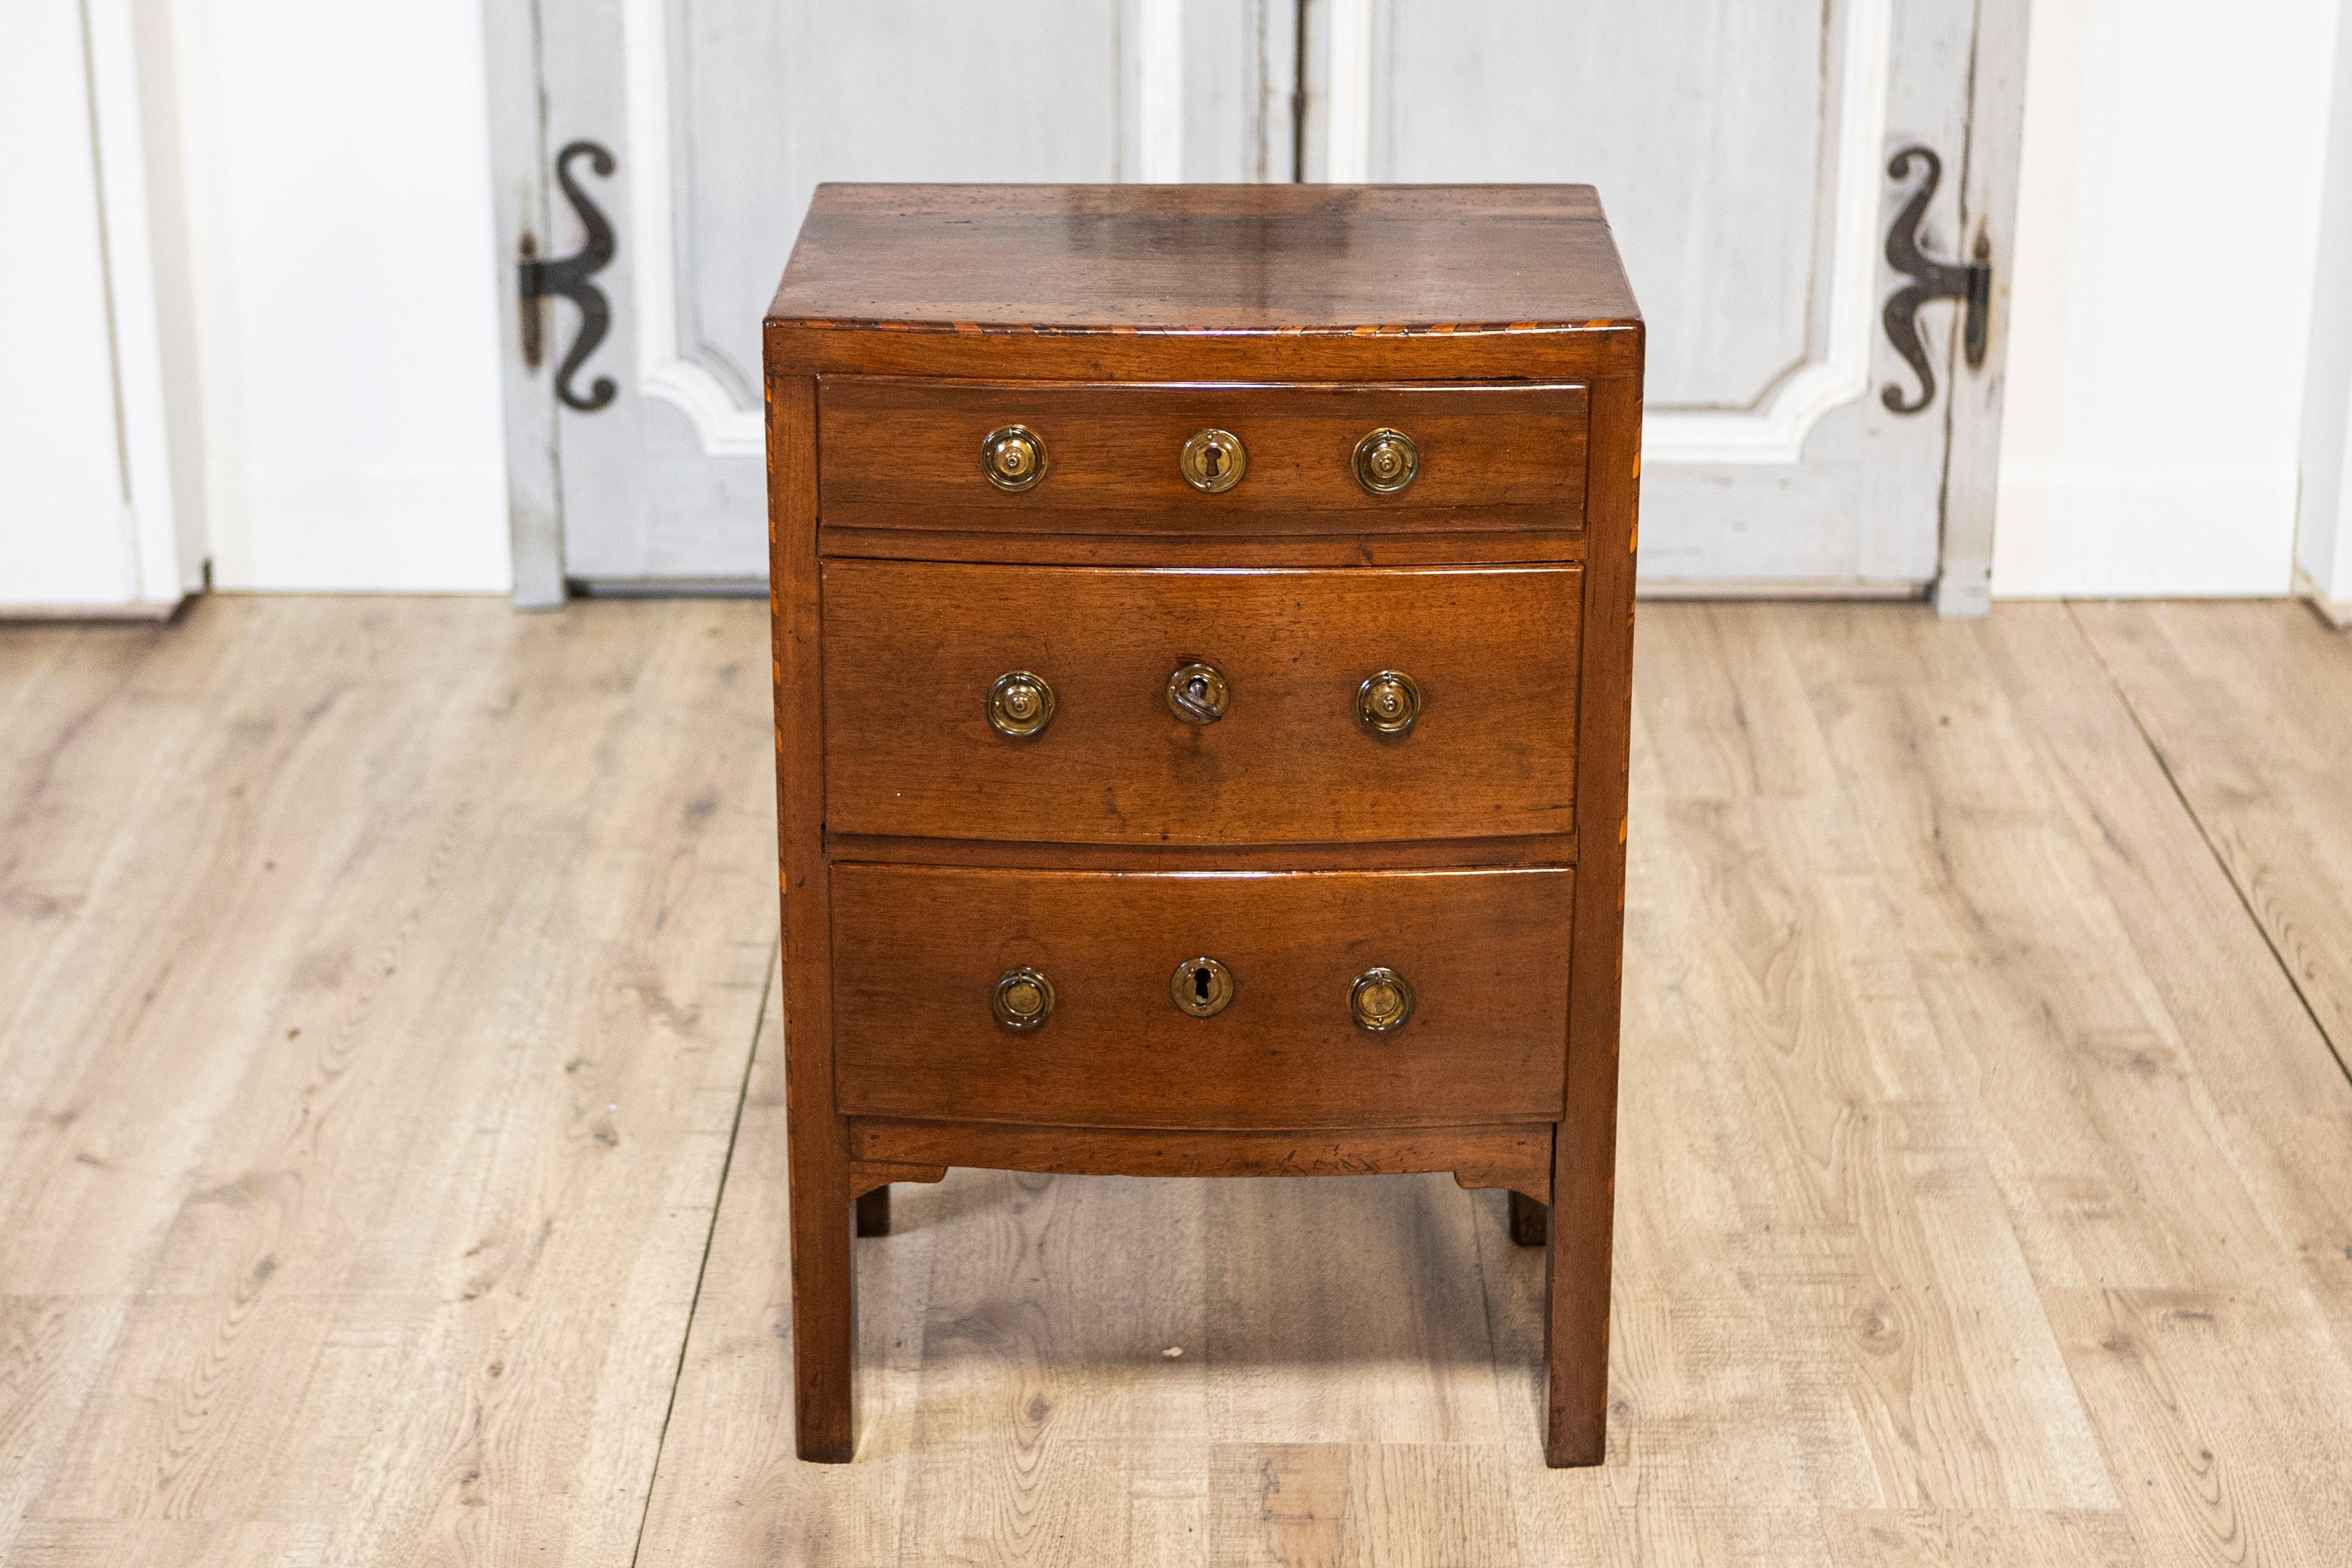 An Italian early 19th century walnut three-drawer bedside chest from Vicenza with, inlaid banding and Classical brass hardware. This early 19th-century Italian walnut bedside chest from Vicenza epitomizes classic elegance and utility. It features a